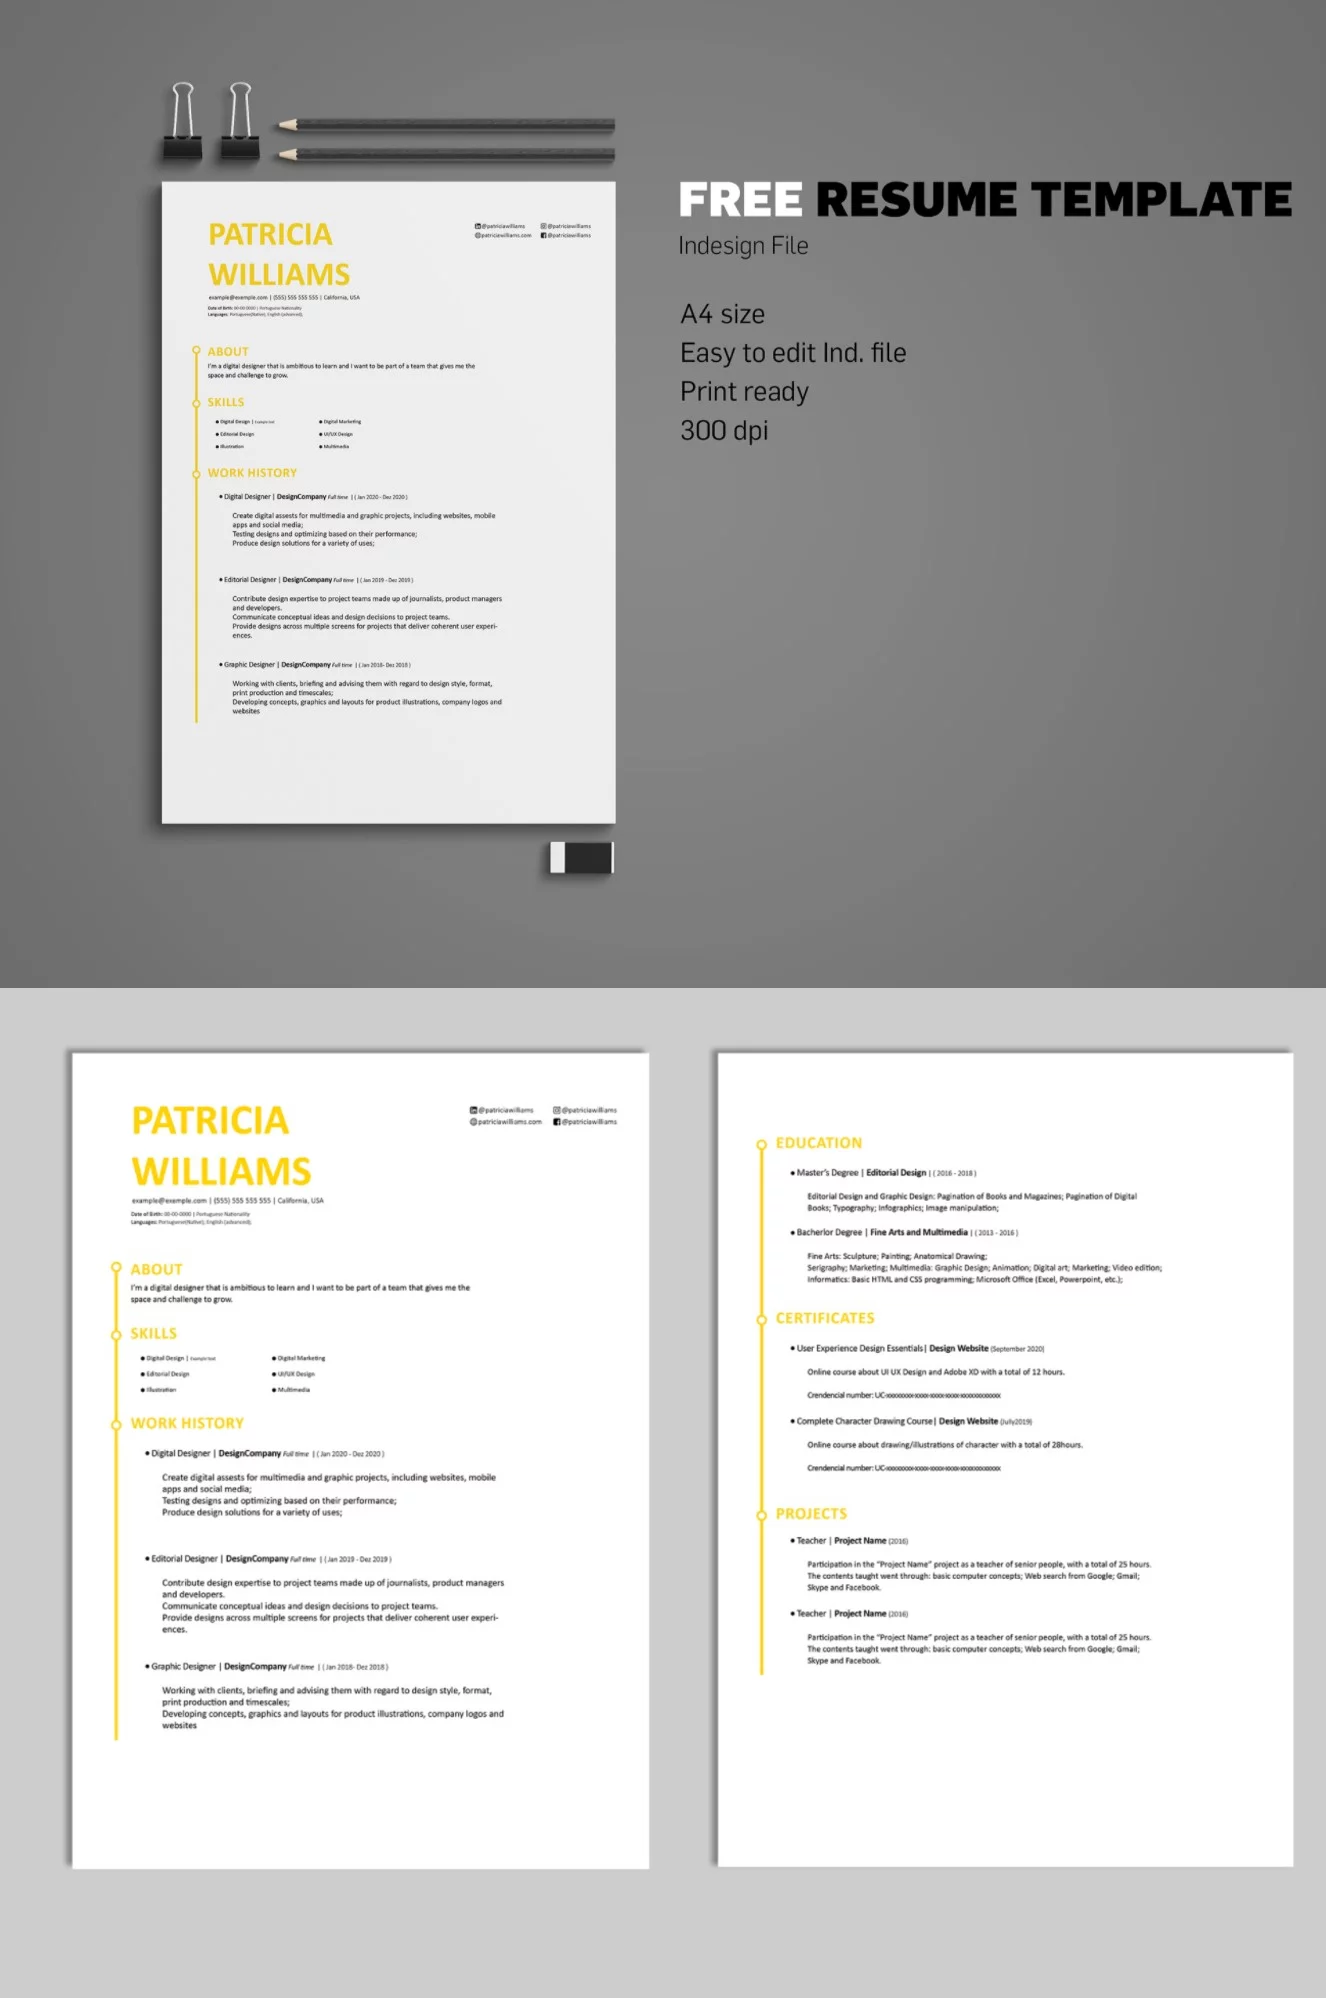 Free Resume Template for InDesign